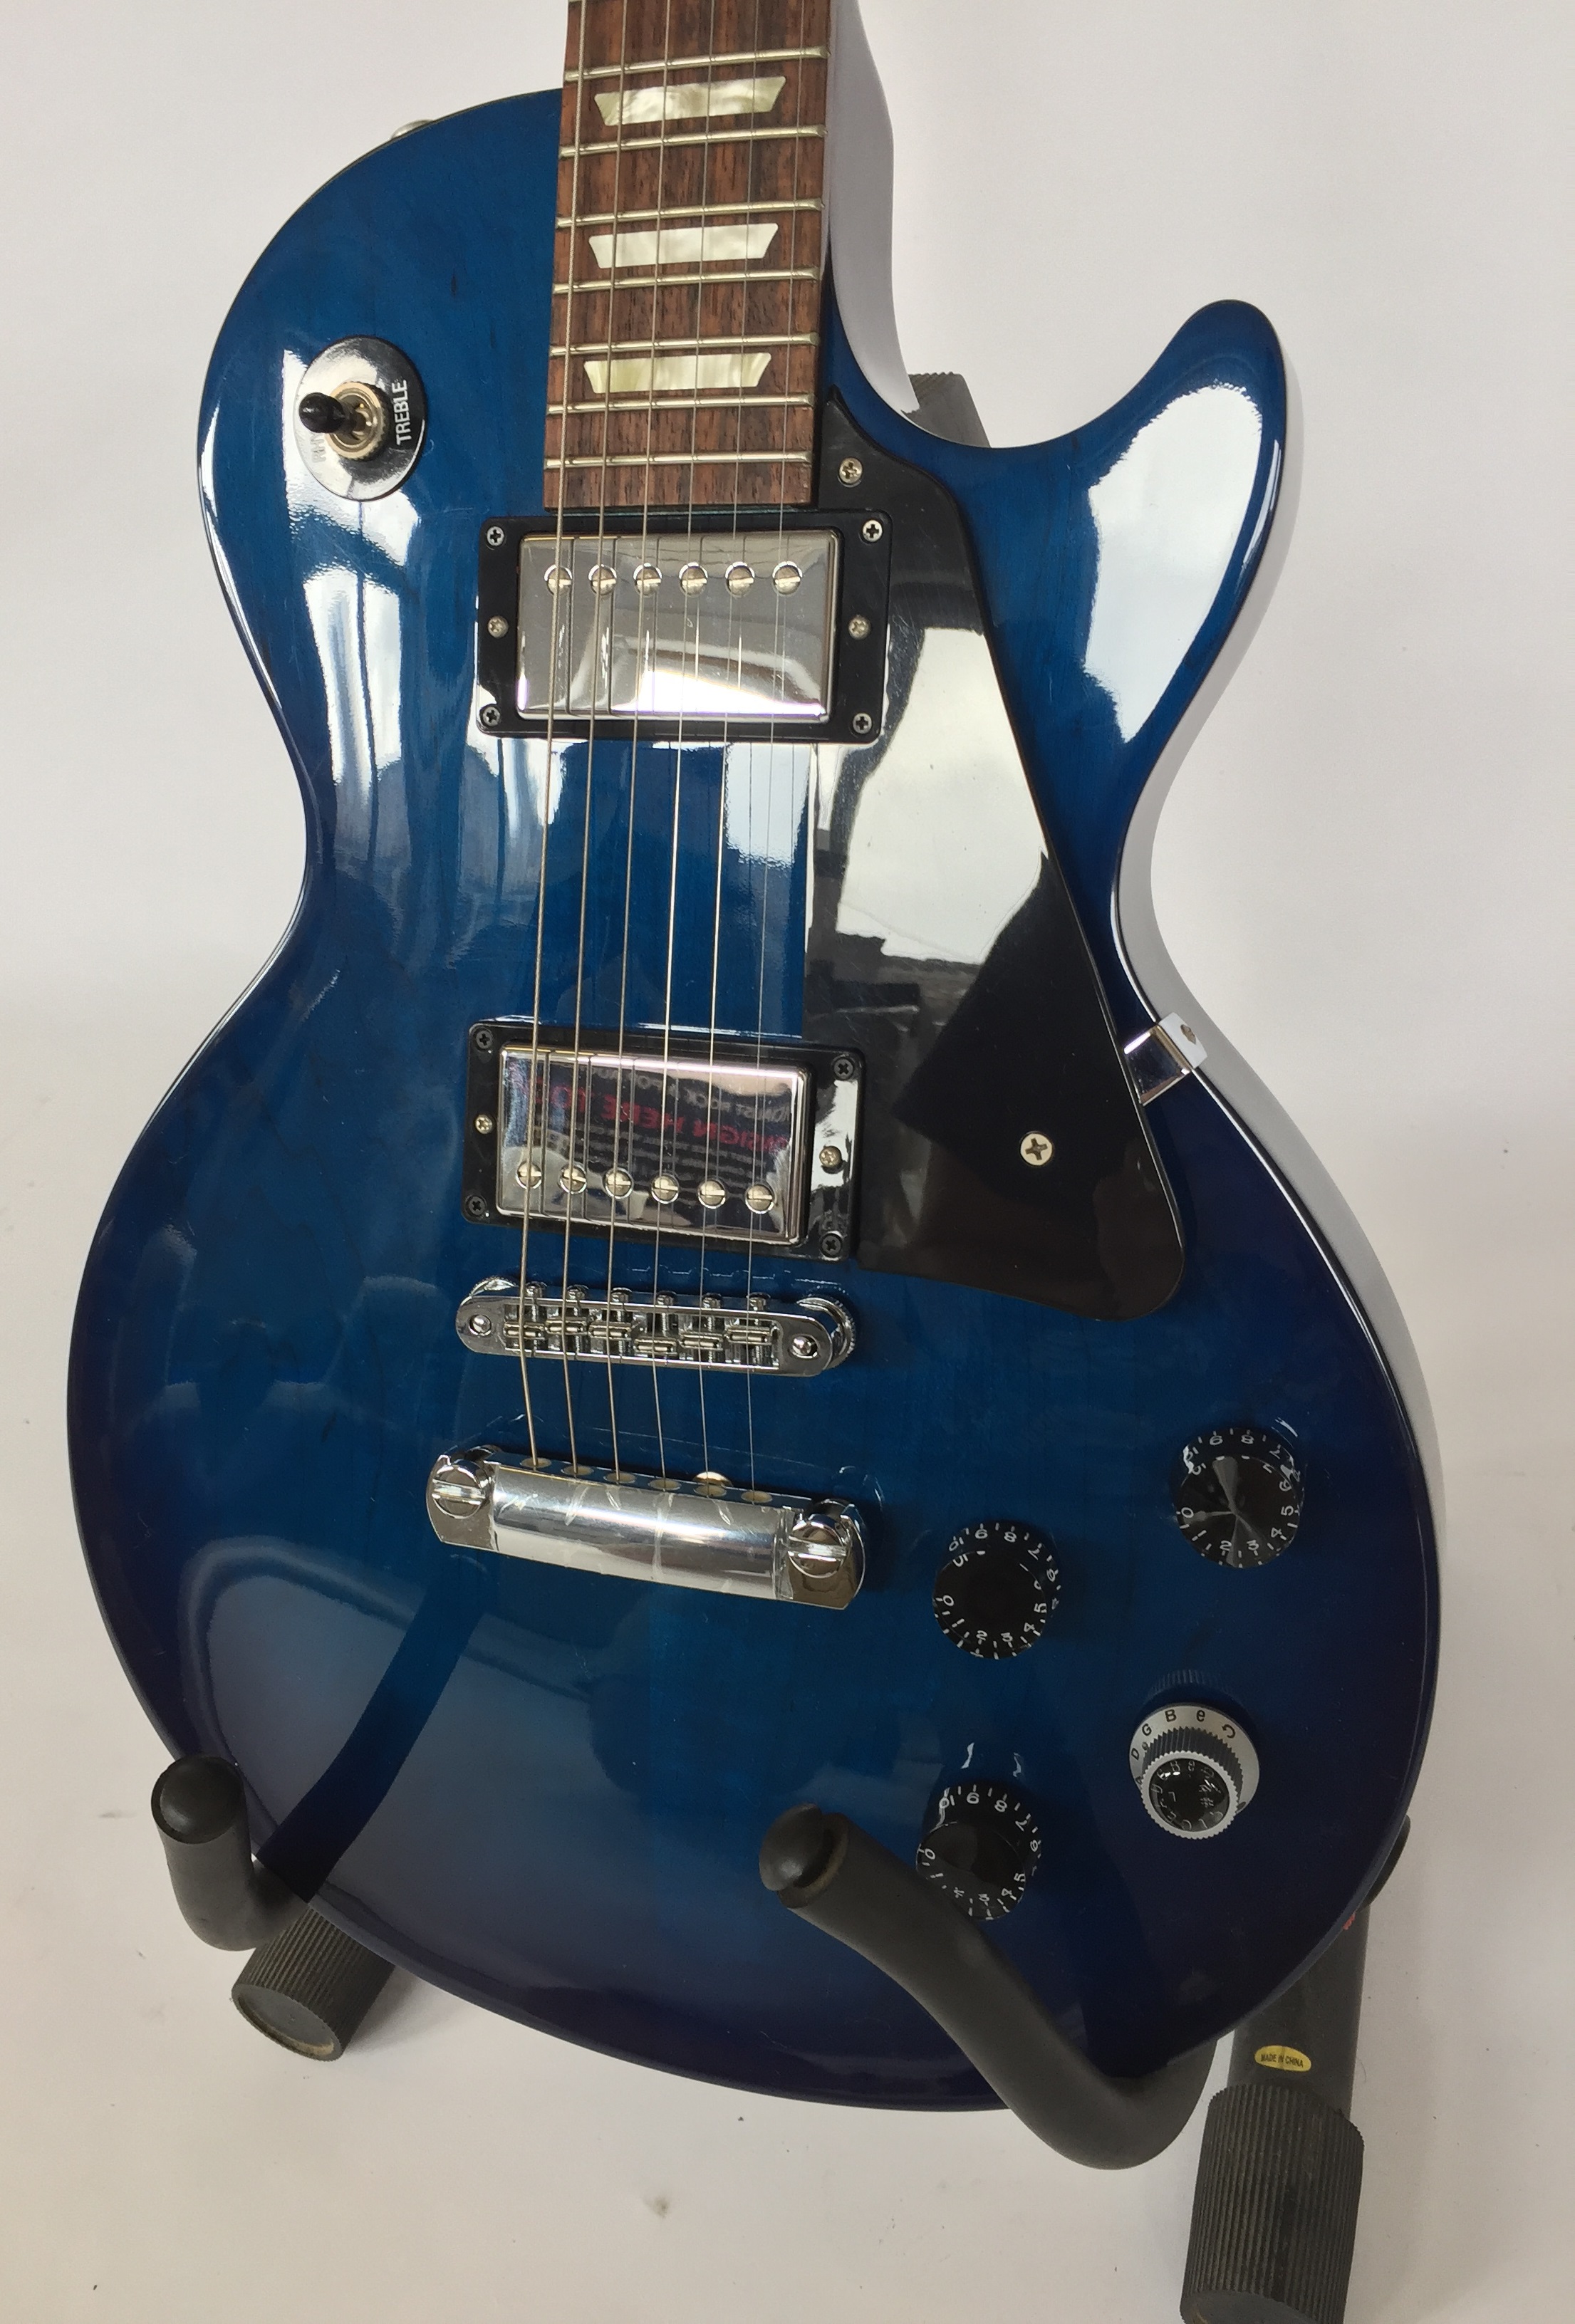 GIBSON LES PAUL ROBOT BLUE - Serial 026980641. - Image 2 of 8